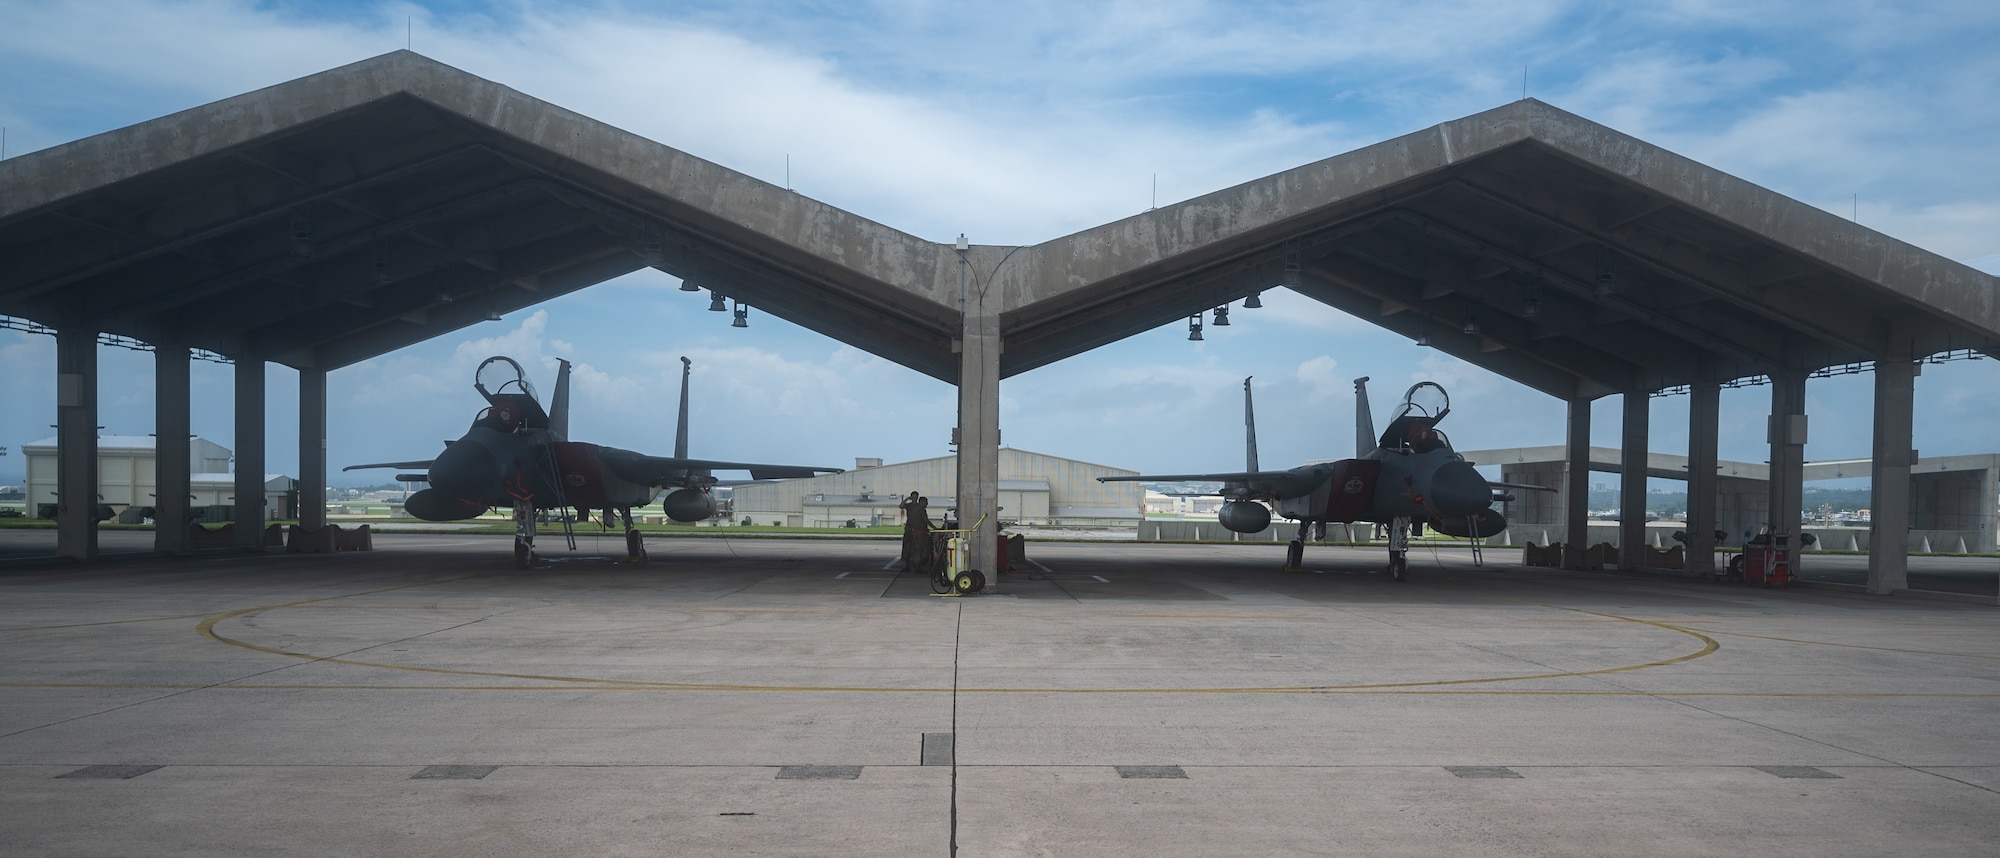 U.S. Air Force Airmen from the 67th Aircraft Maintenance Unit prepare for pre-flight inspections of an F-15C eagle at Kadena Air Base, Japan, Sept. 14, 2021. The 18th Wing is home to the 67th and 44th Fighter Squadrons. (U.S. Air Force photo by Airman 1st Class Stephen Pulter)